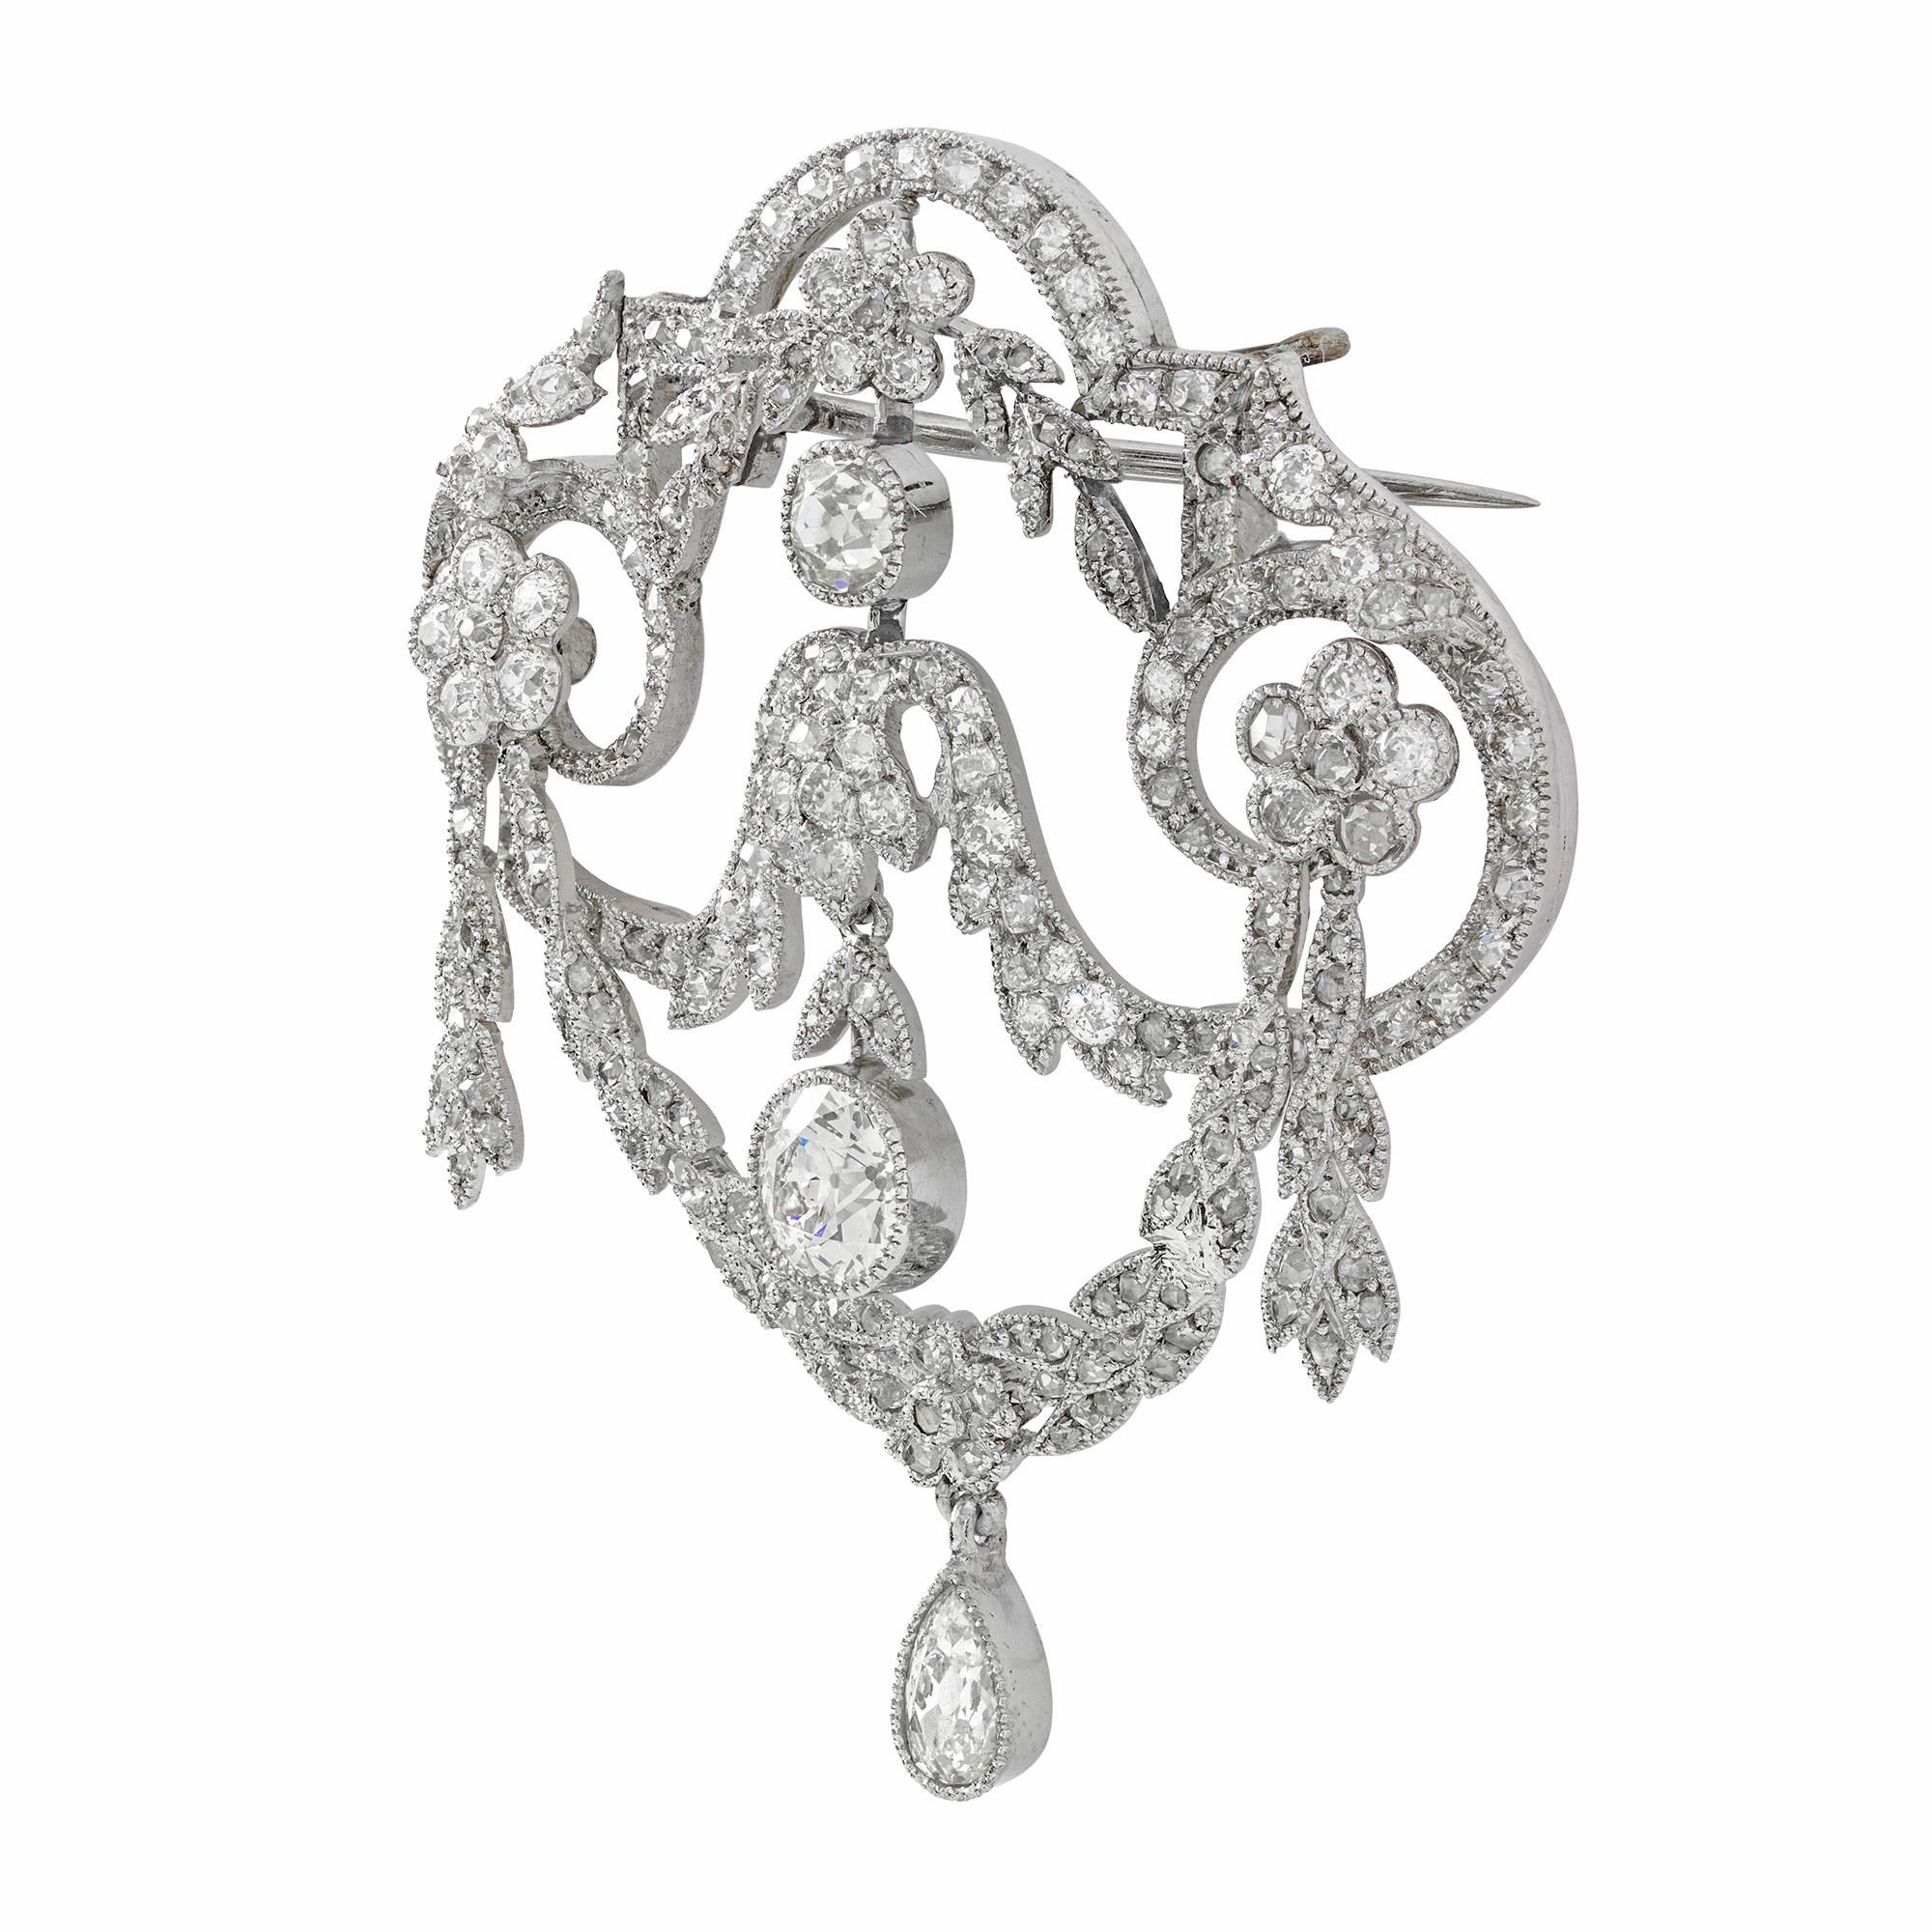 An Edwardian diamond festoon brooch, an old brilliant-cut diamond, estimated to weigh 0.85 carats, surmounted by old and rose-cut festoons with floral clusters and leaf motifs with a pear shape old cut diamond suspended from the central swag,